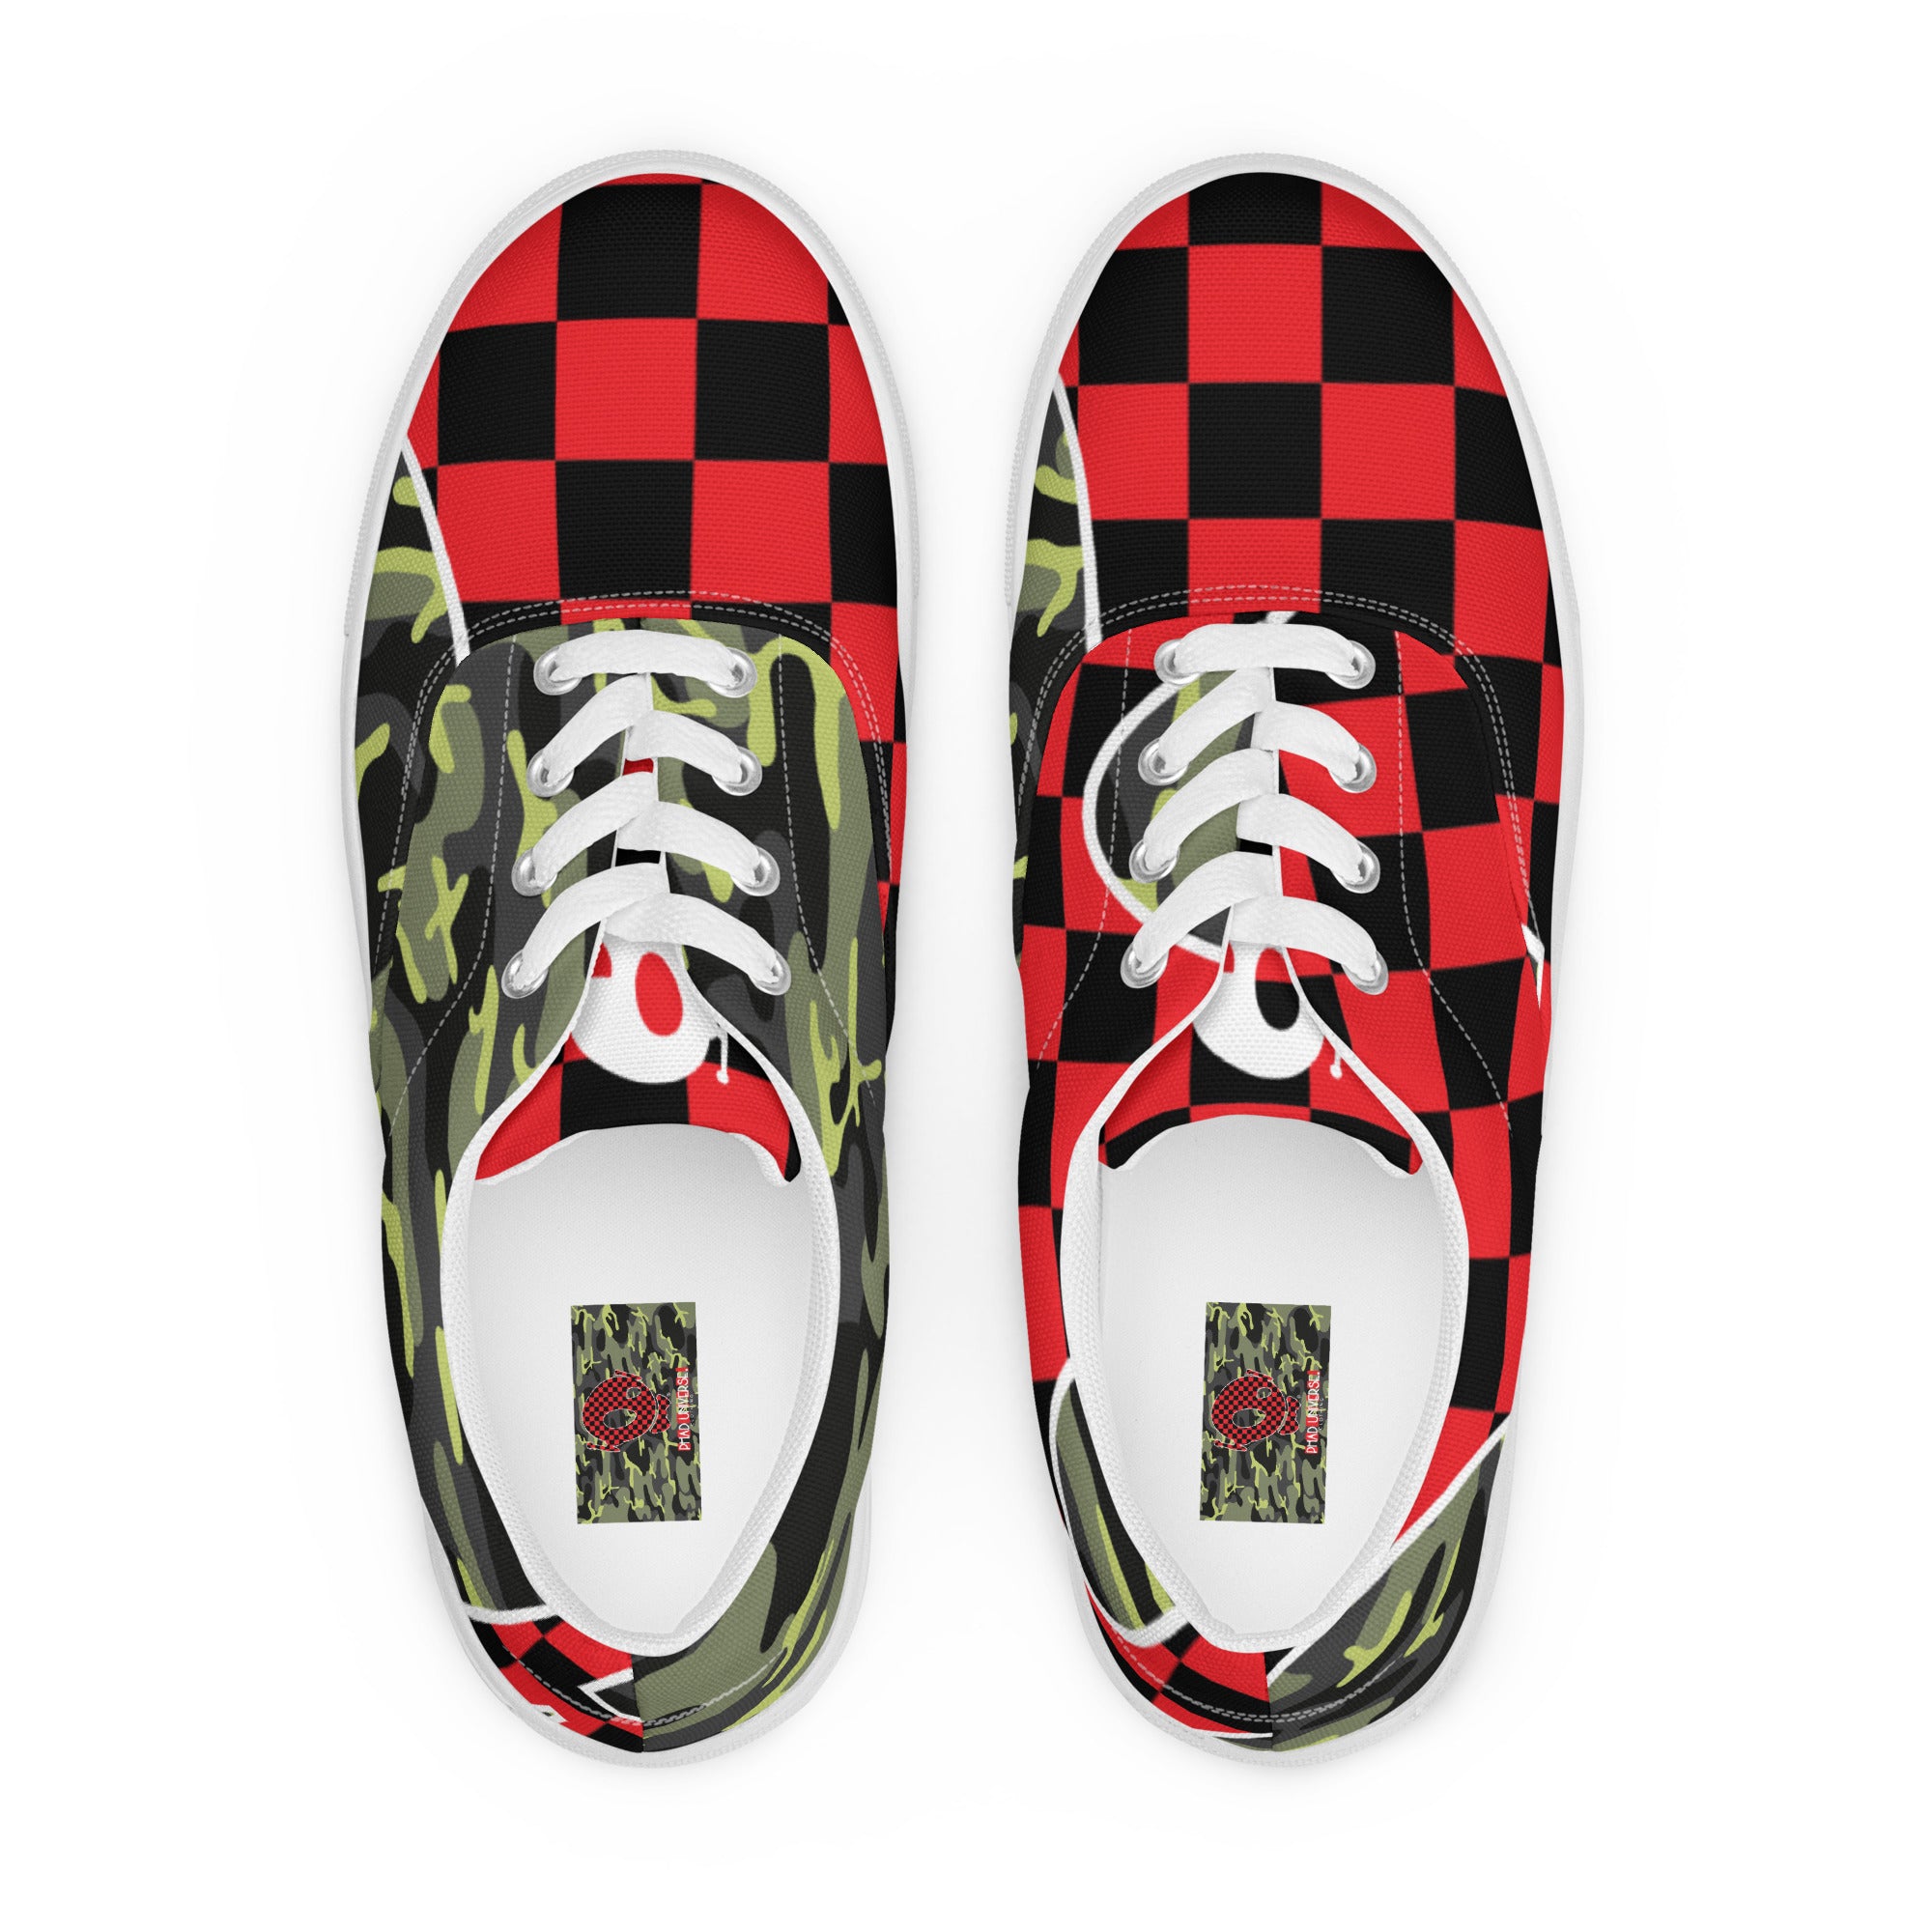 CHECKERED CLASHED CAMO PU MEN'S LACED CANVAS SHOES